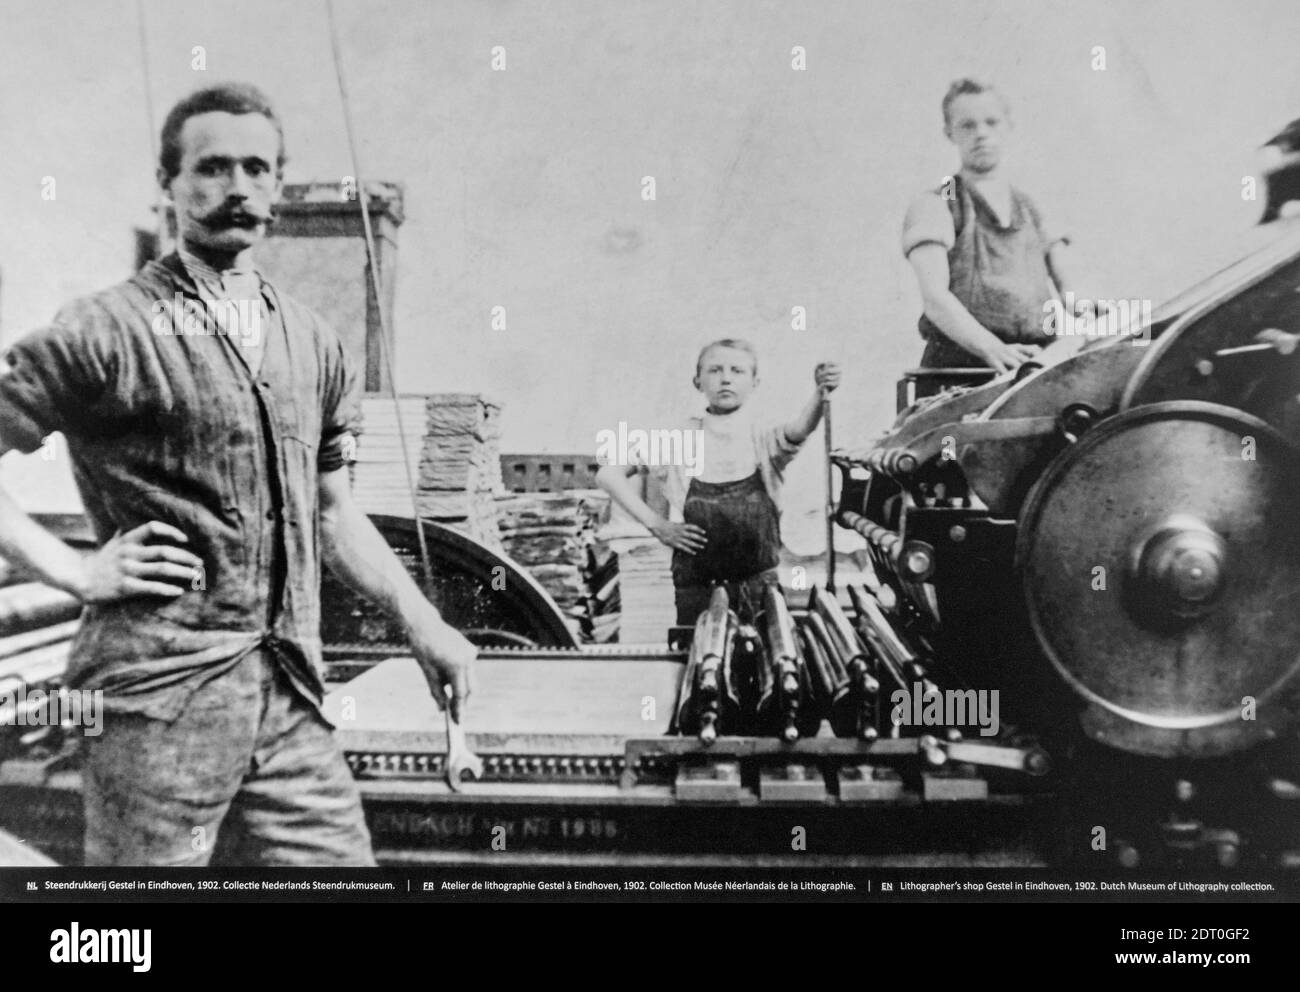 1902 black and white archival photo showing pressman and children working on lithographic printing press in pressroom / print shop Stock Photo